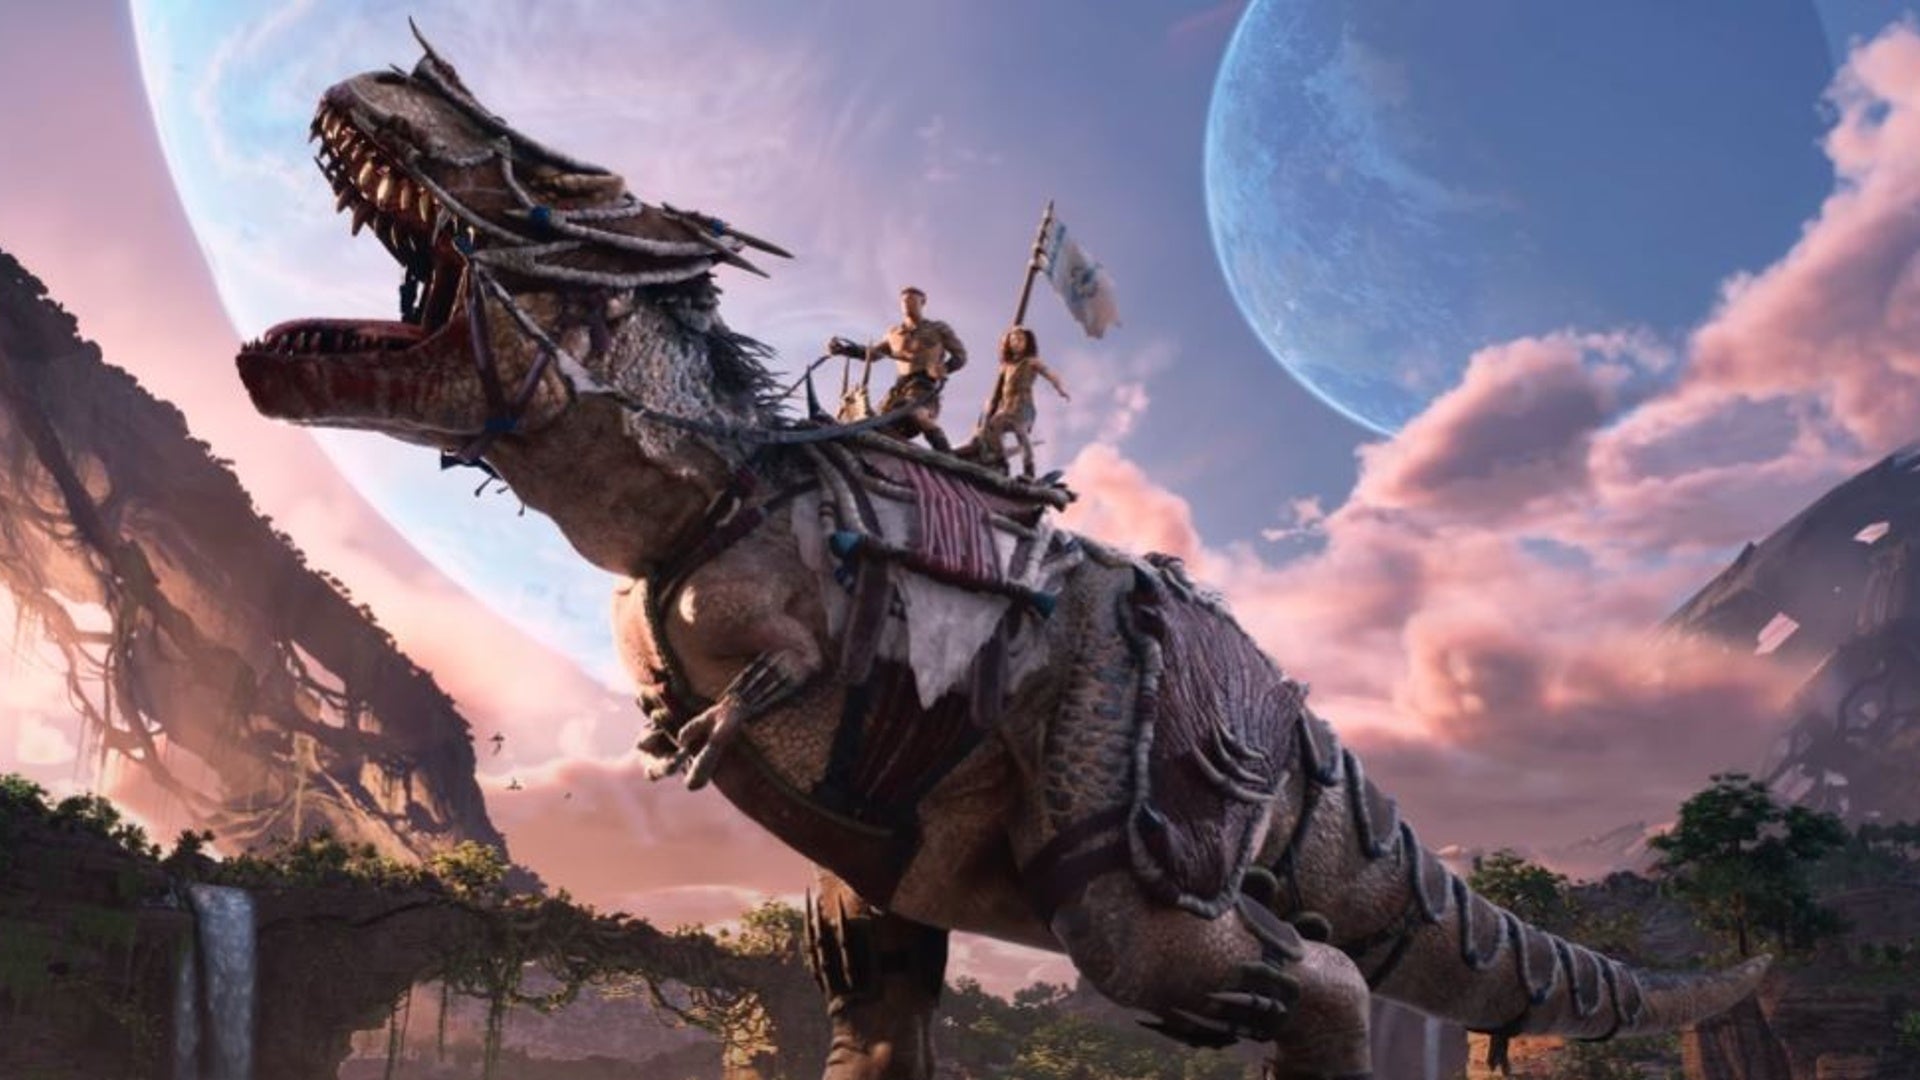 ARK 2 is out in 2023 and it’s all about dads, dinos and Vin Diesel